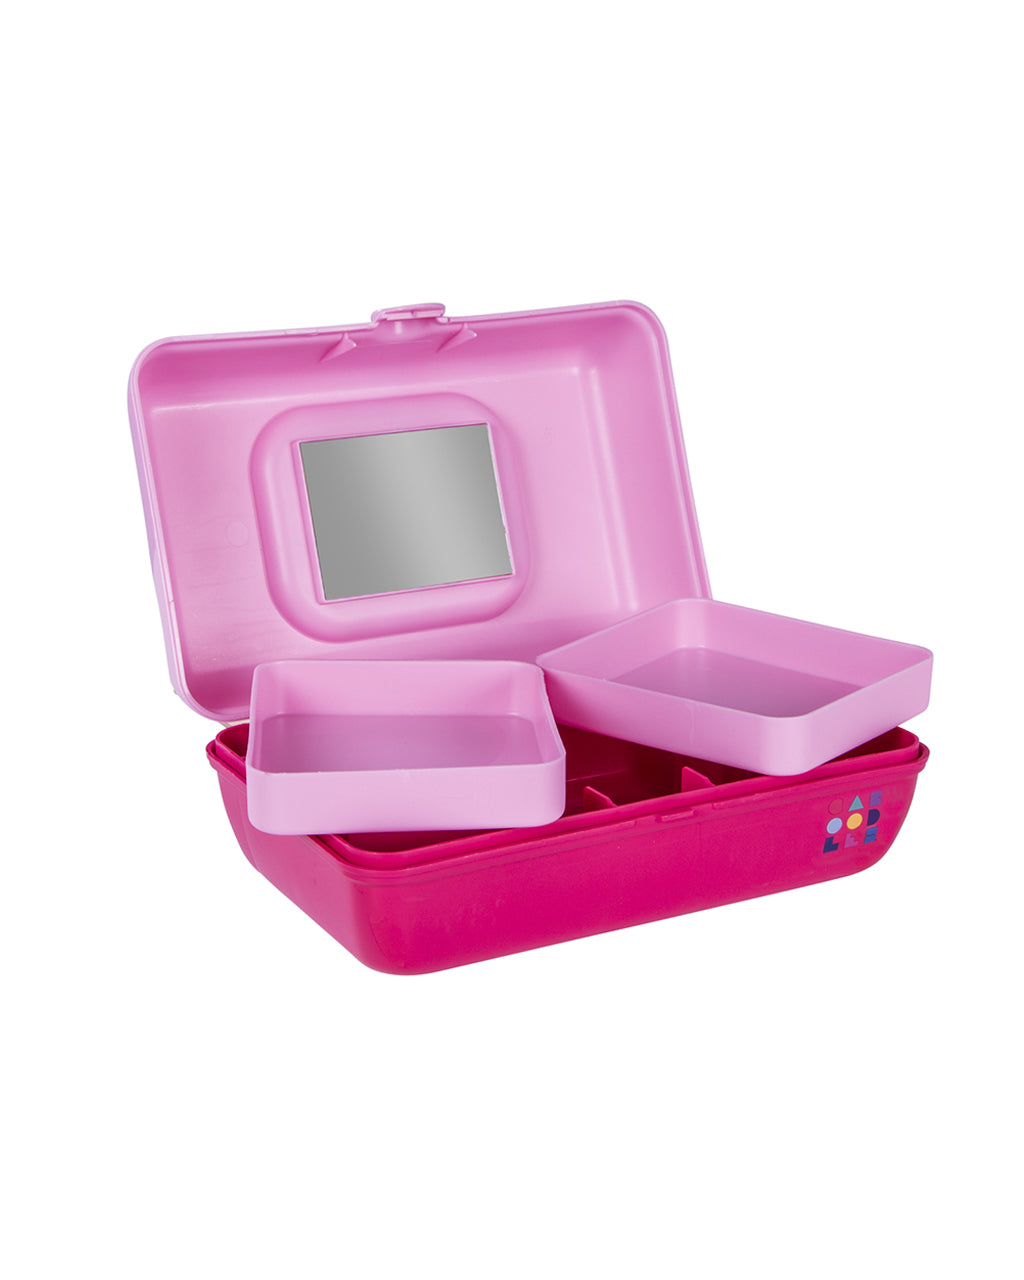 Small Caboodles Makeup Case - Light Pink & Hot Pink by caboodles - organizer - www.speedy25.com